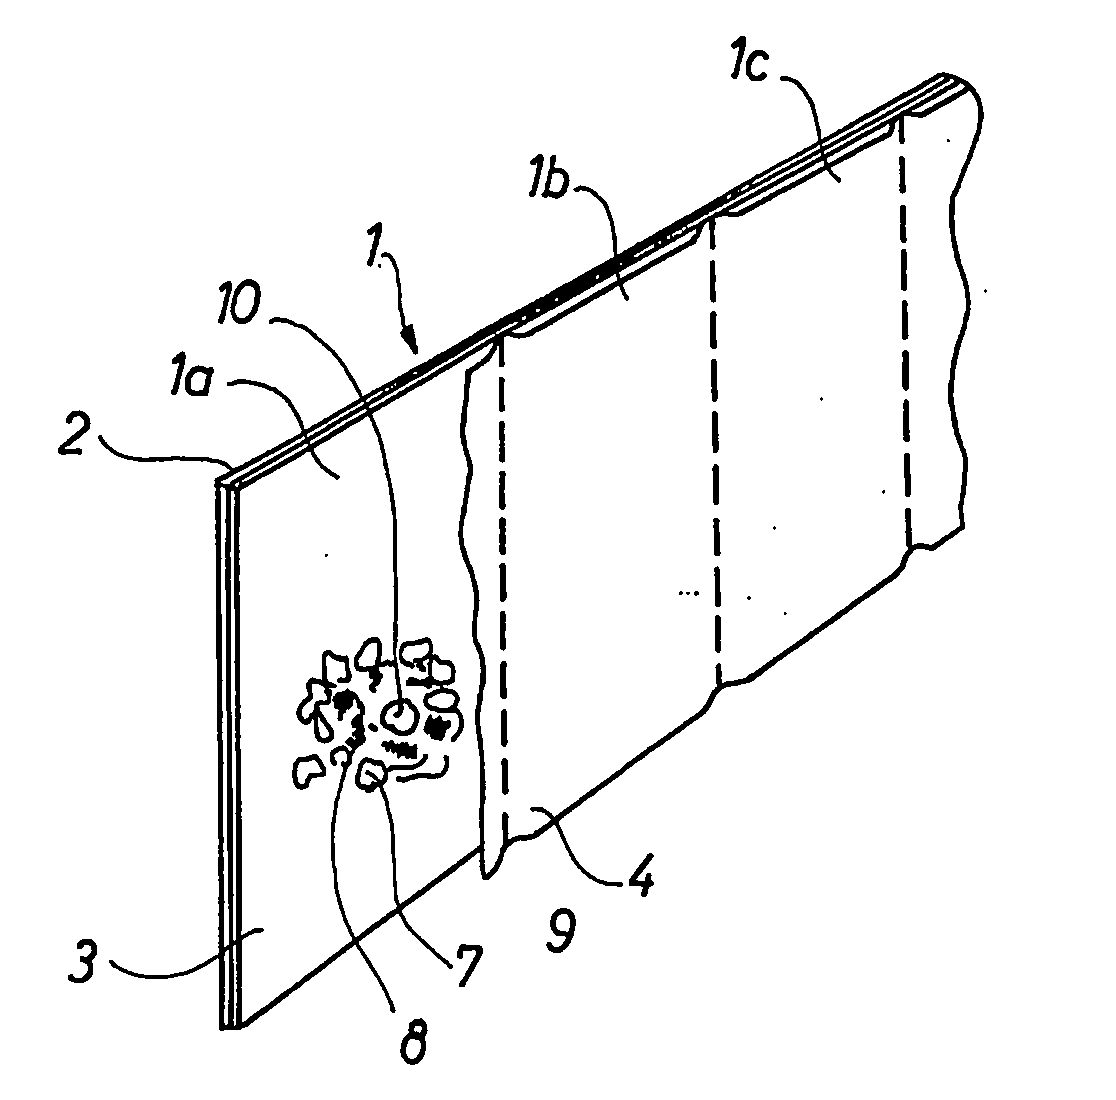 Seed tape including successively arranged germinating units as well as a method of germinating said tape